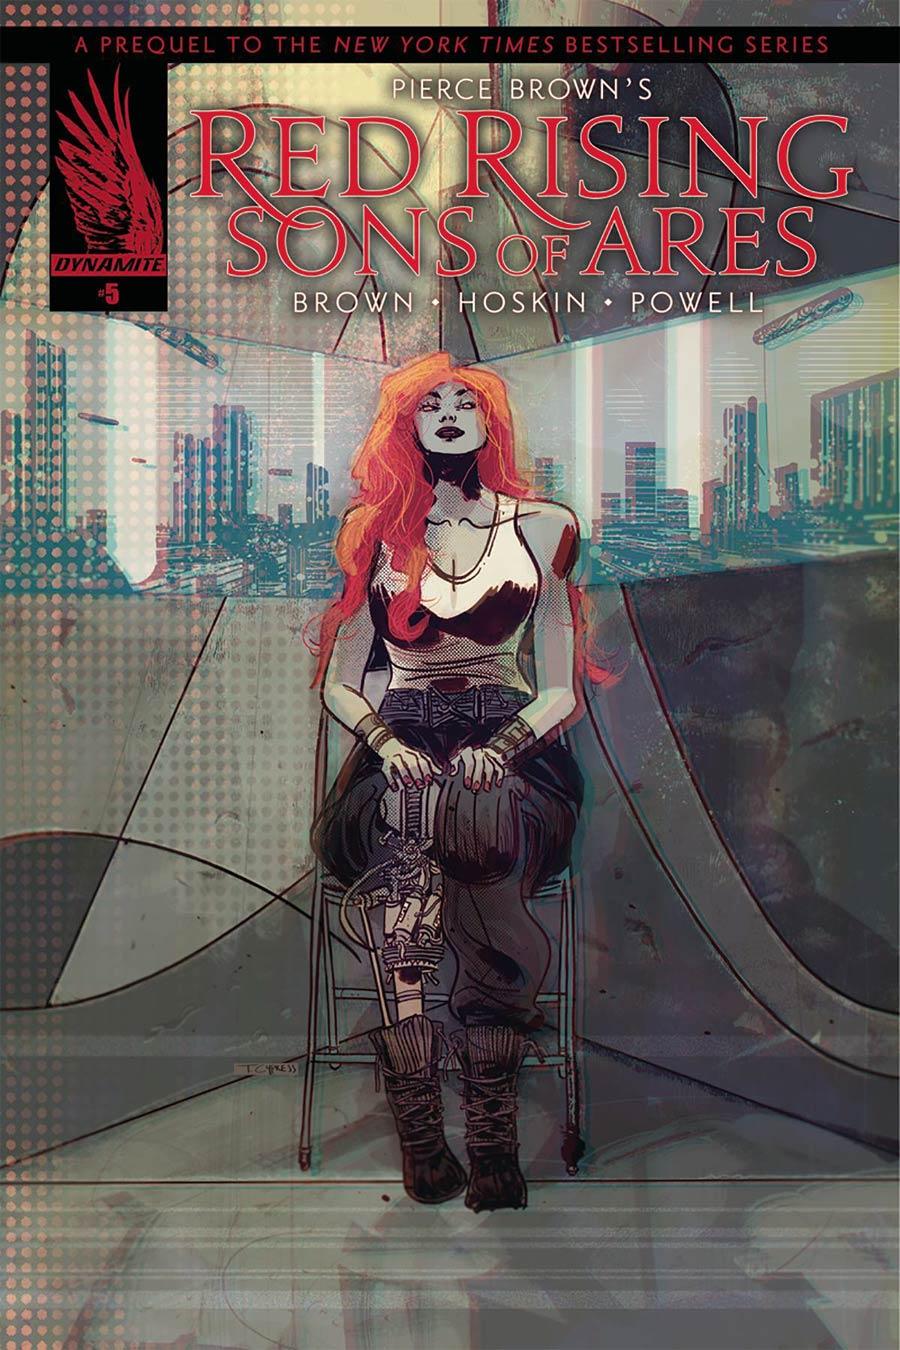 Pierce Browns Red Rising Sons Of Ares Vol. 1 #5